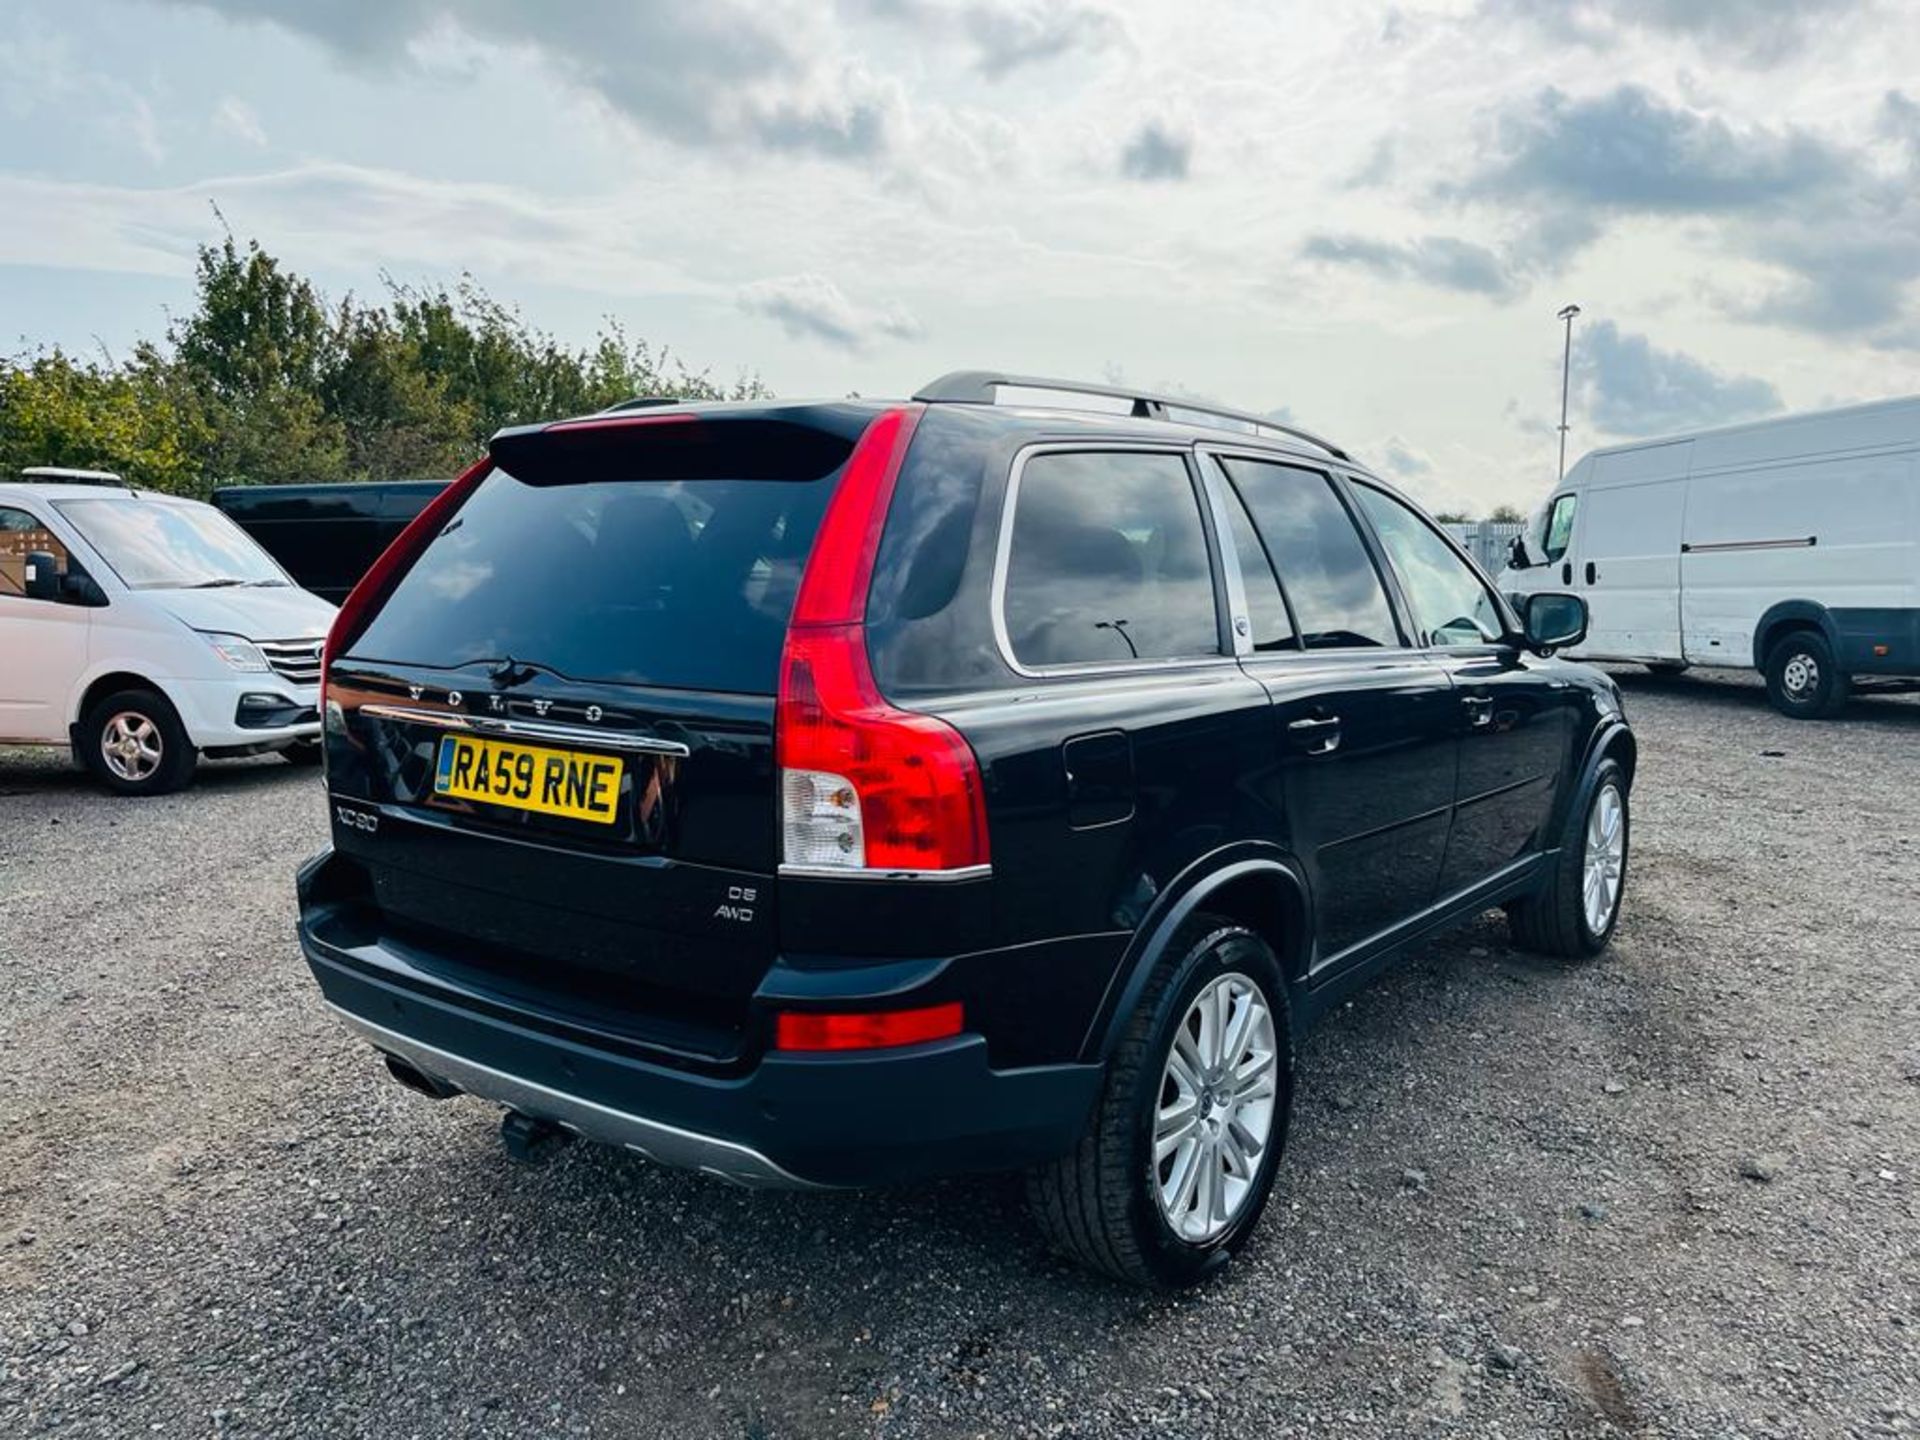 ** ON SALE ** Volvo XC90 2.4 D5 185 Executive G/T Estate 2009 '59 plate' - Climate Control - No Vat - Image 6 of 30